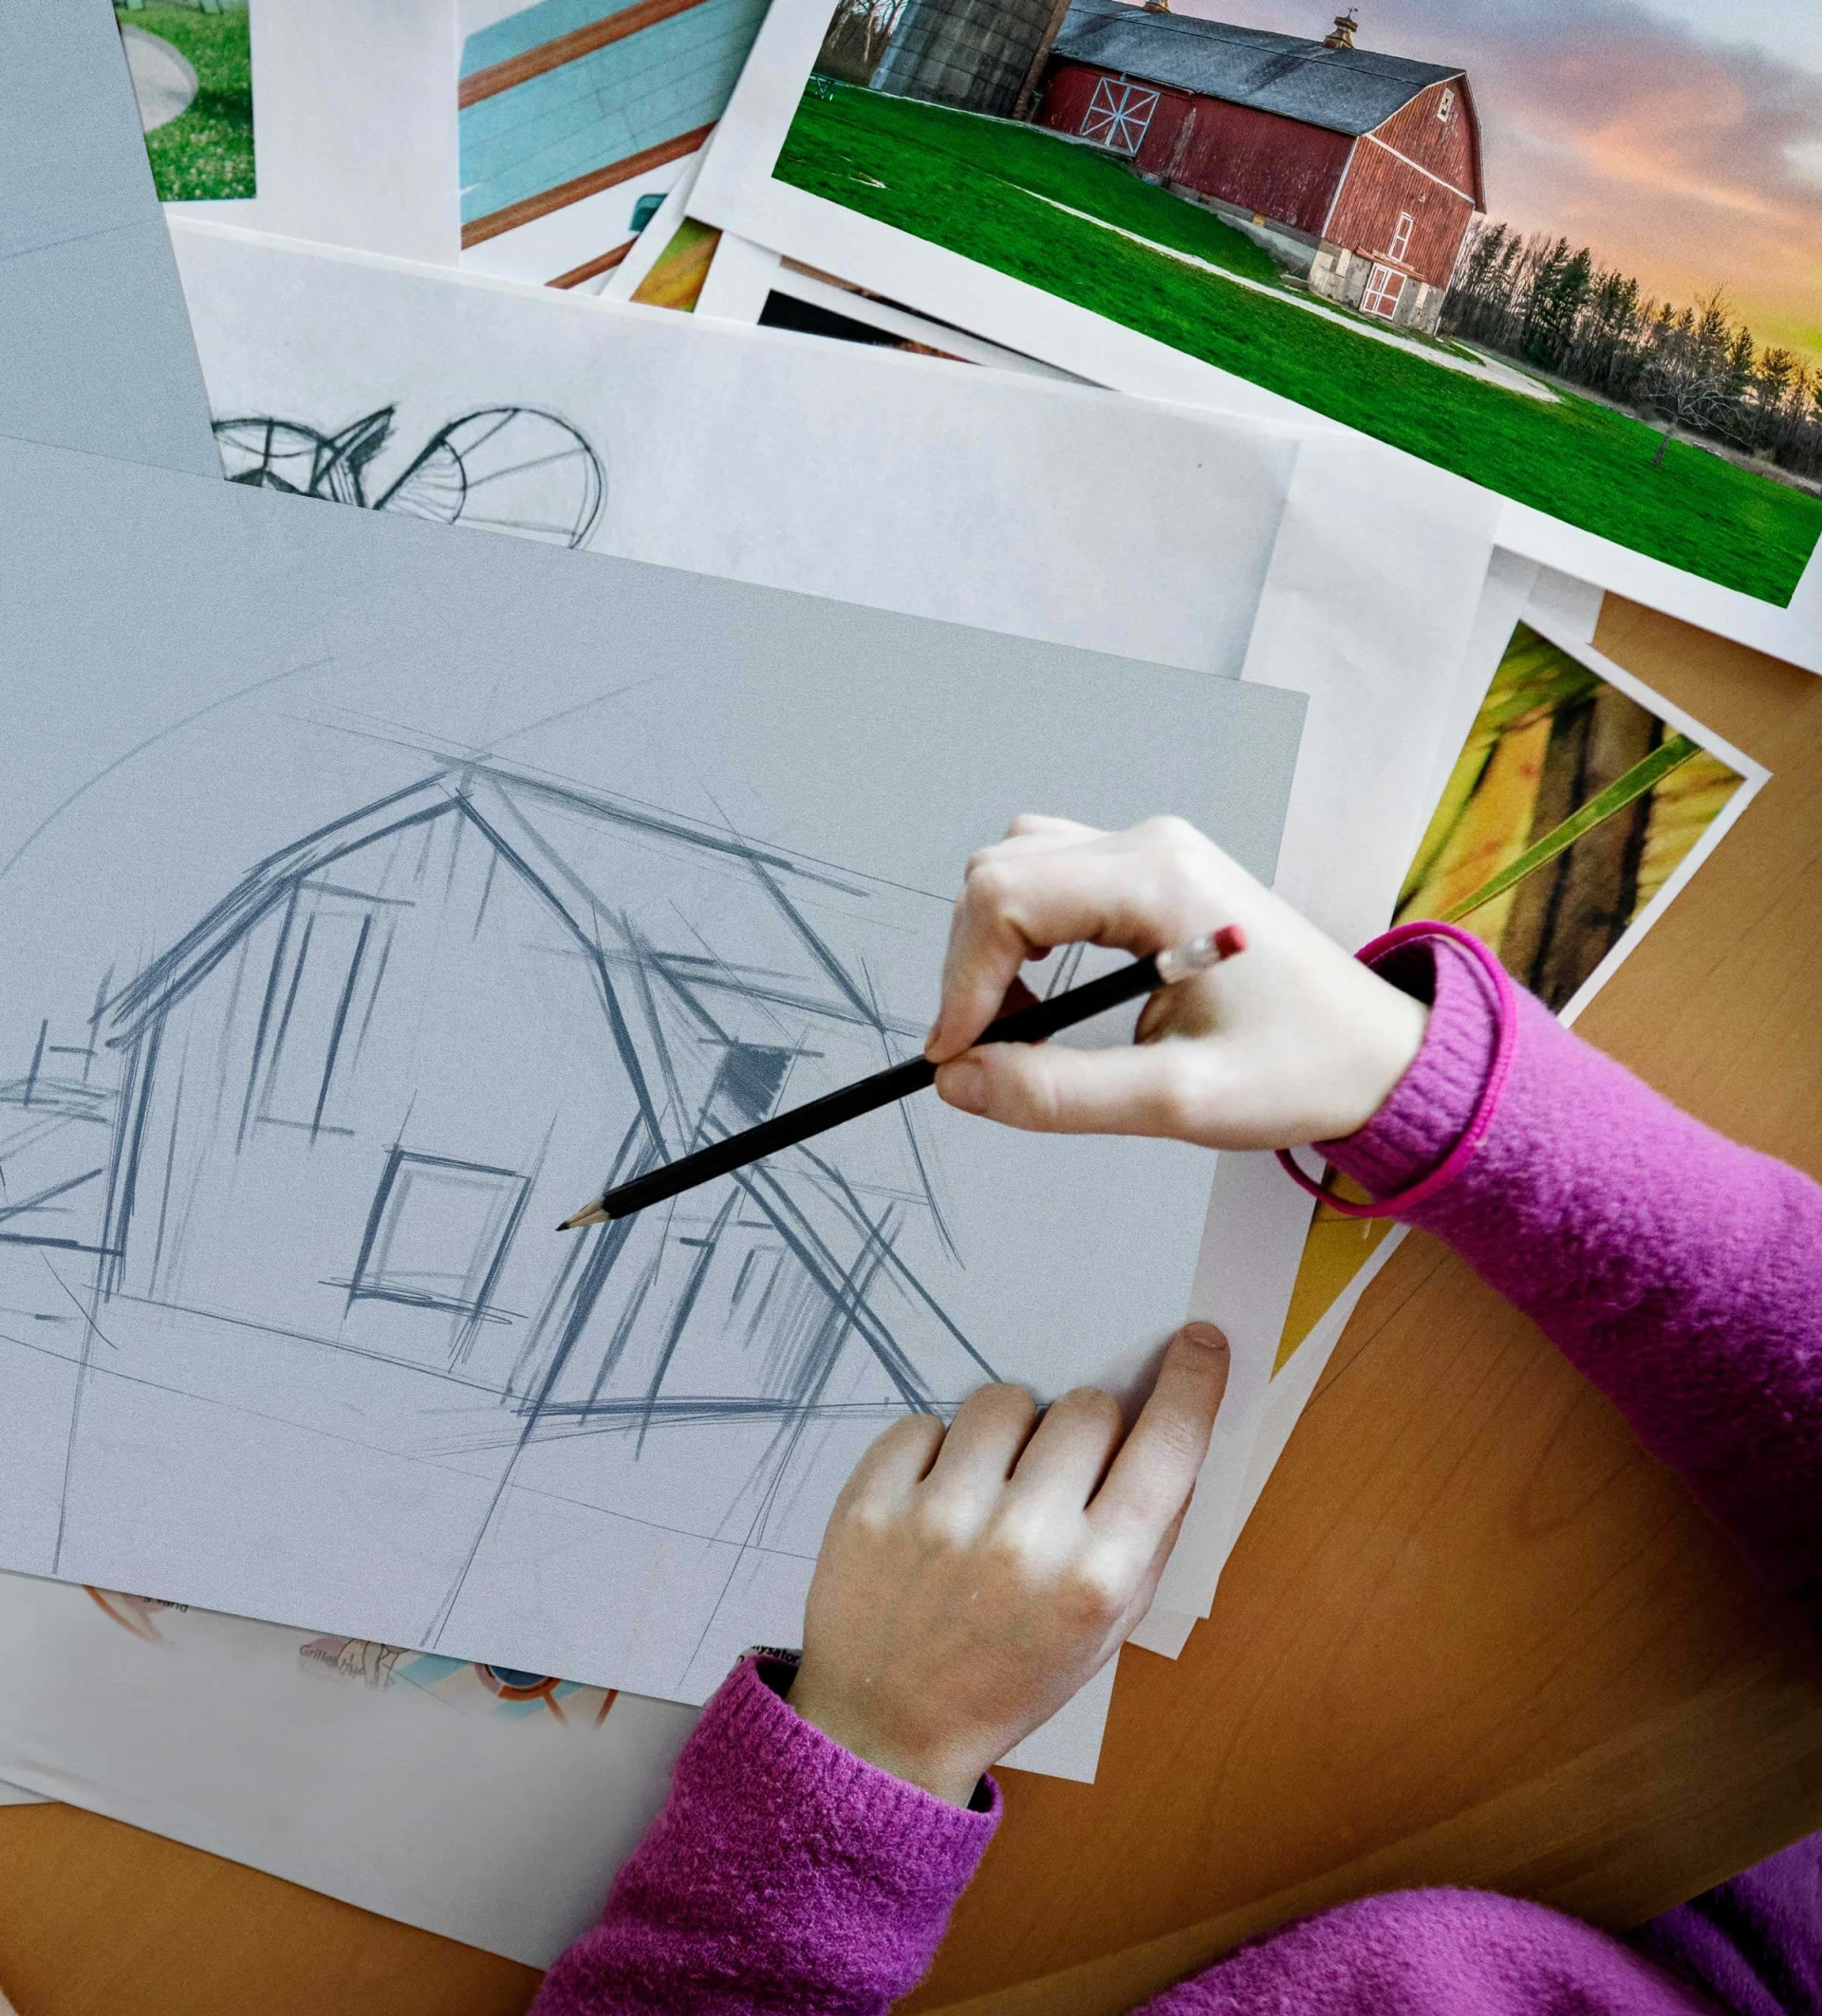 Overhead shot of a girl sketching a piece of playground equipment inspired by a house. She is sitting at a table. Reference images are spread across the table. Reference images can be a helpful playground planning tool.